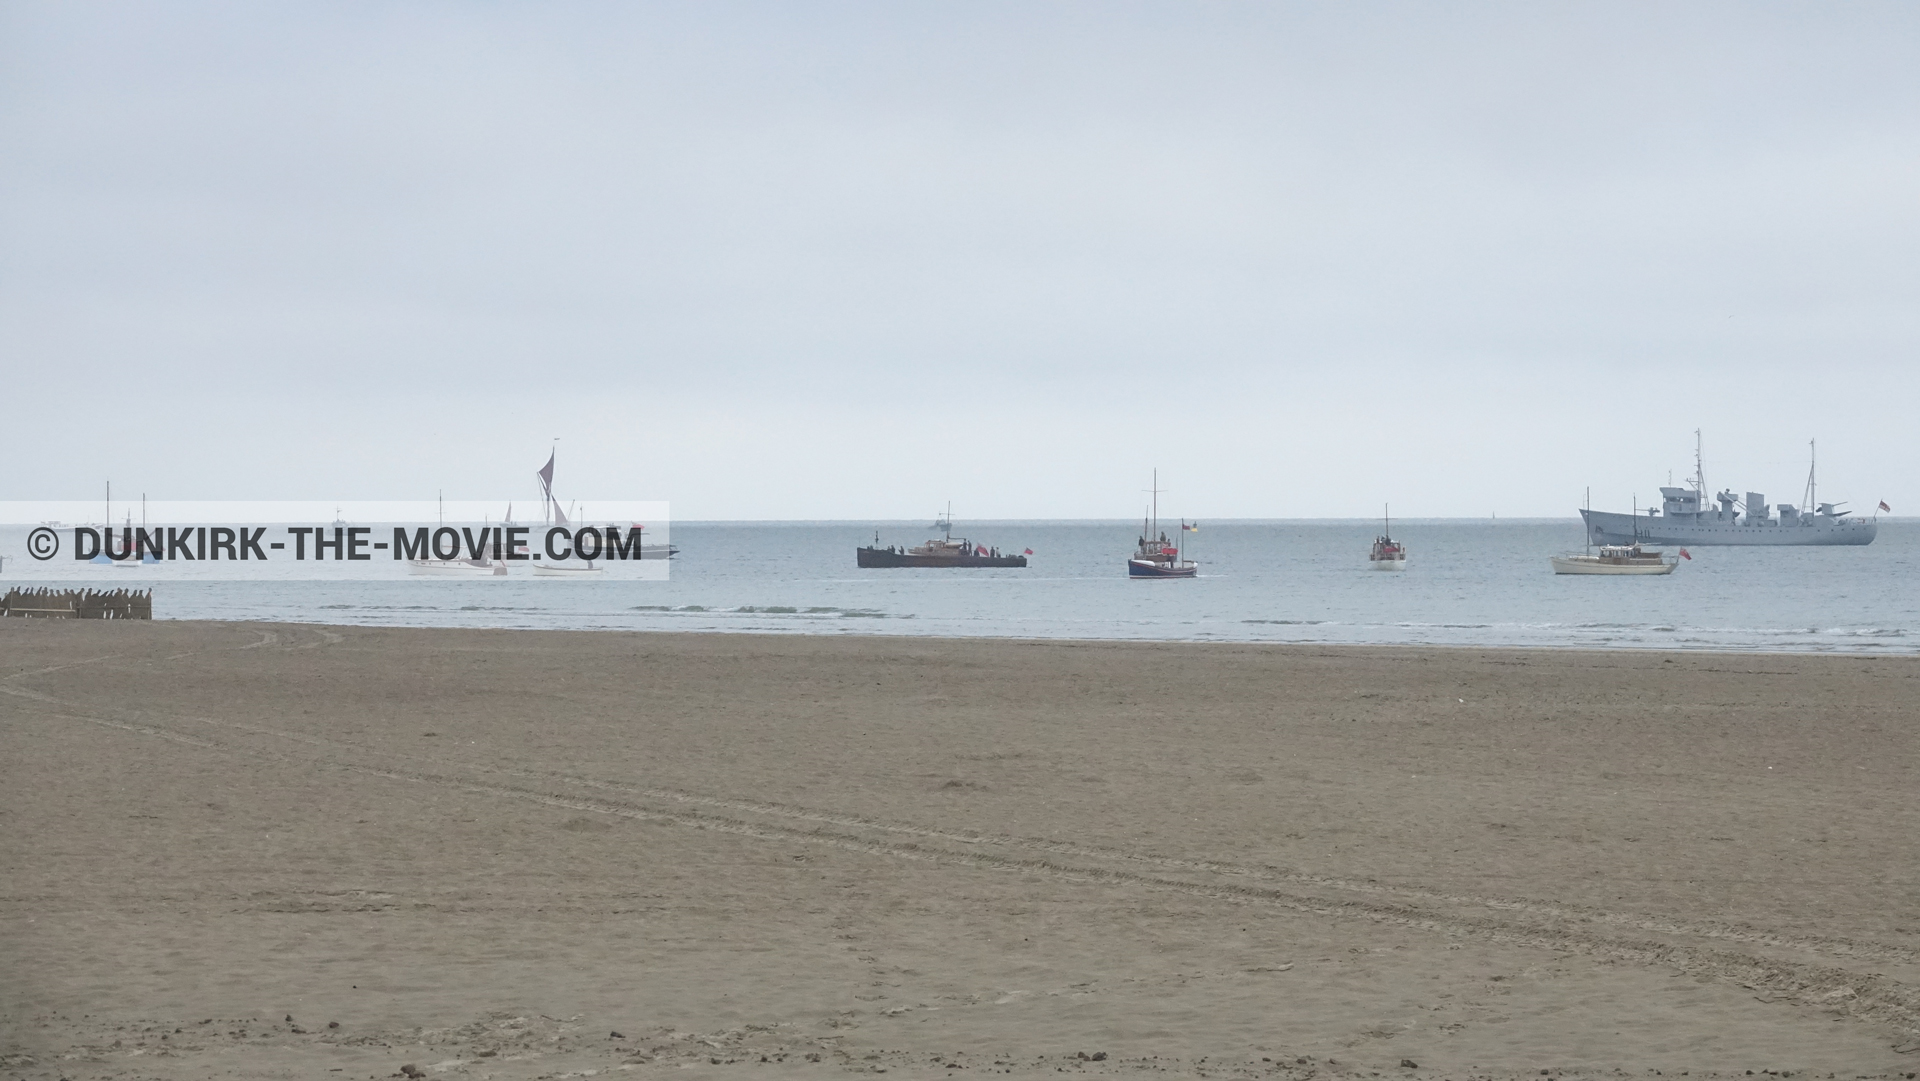 Picture with boat, beach, Xylonite,  from behind the scene of the Dunkirk movie by Nolan